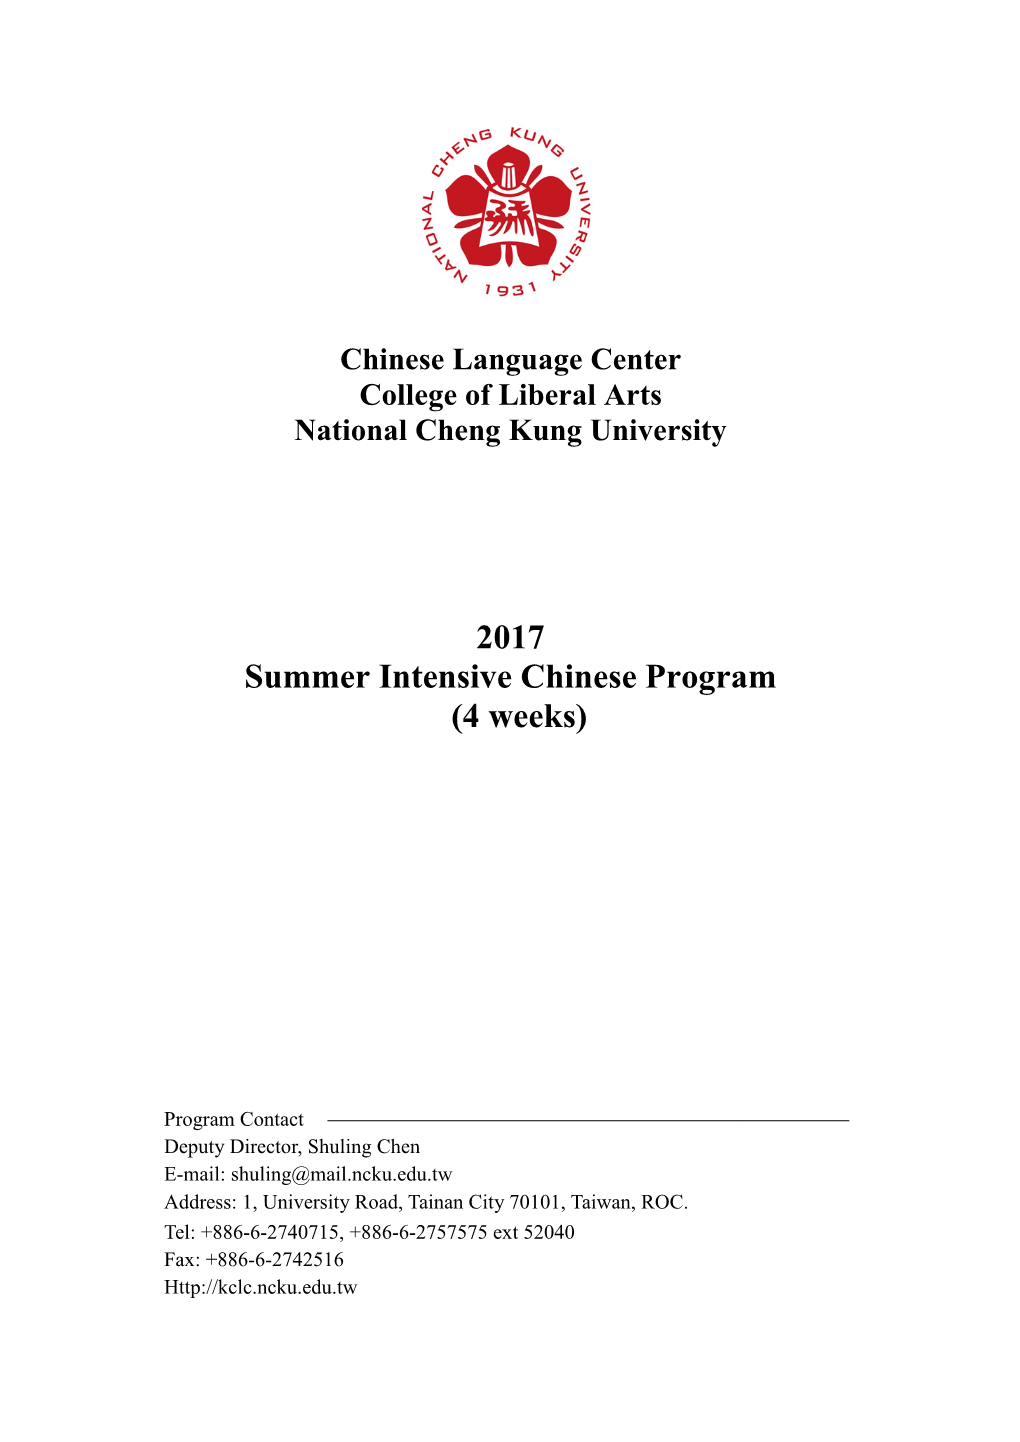 Chinese Language Center College of Liberal Arts National Cheng Kung University